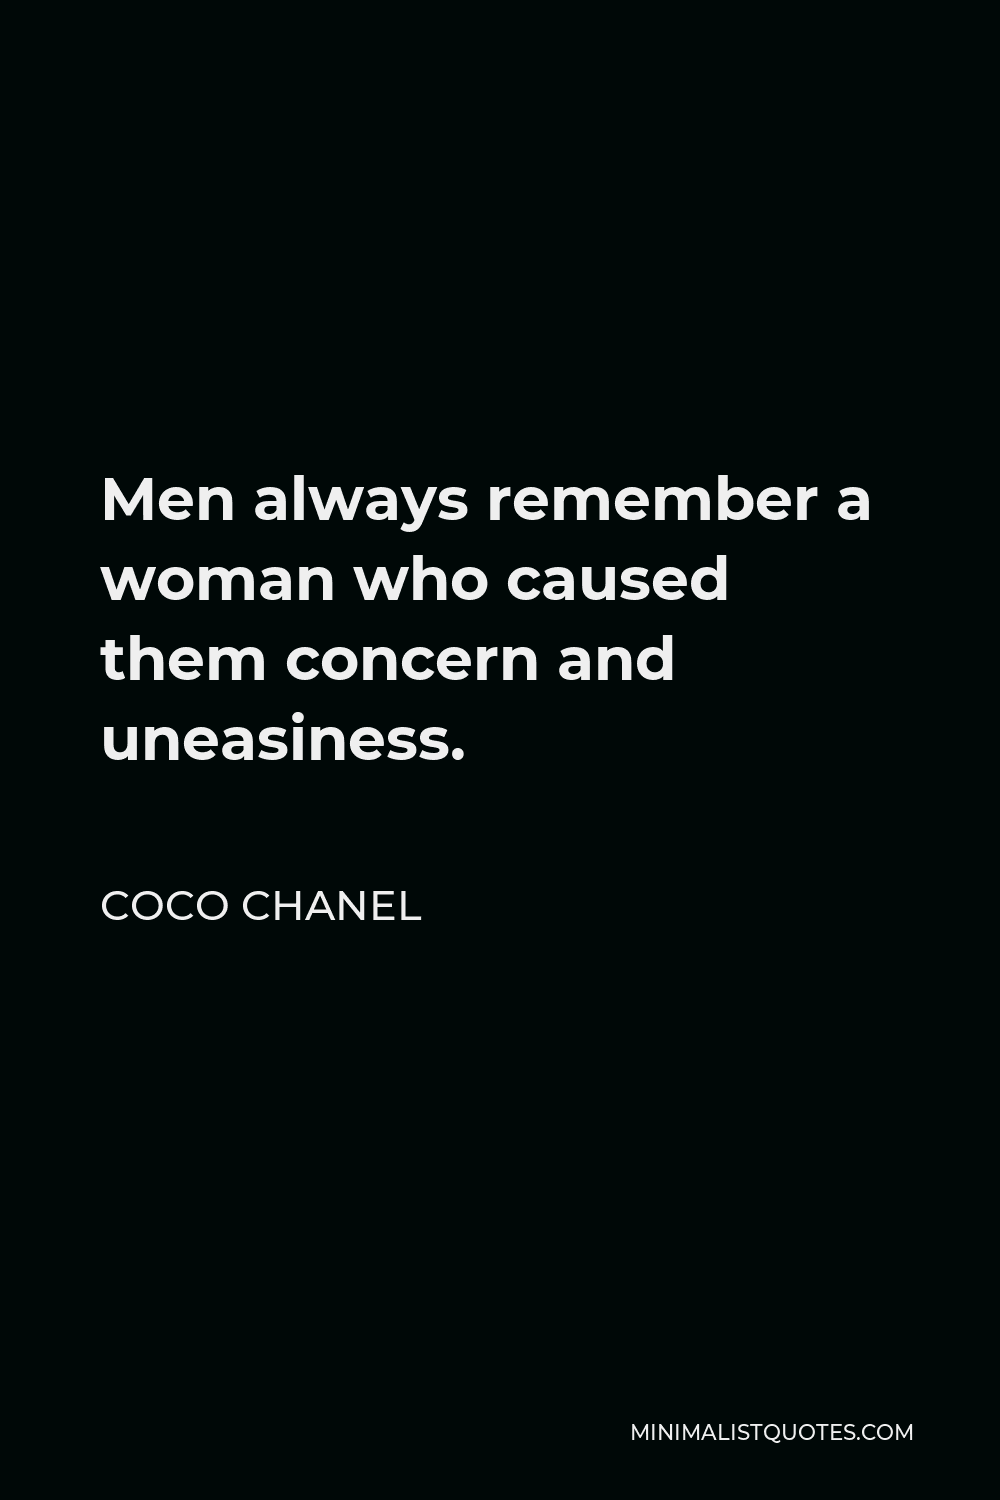 Coco Chanel Quote - Men always remember a woman who caused them concern and uneasiness.